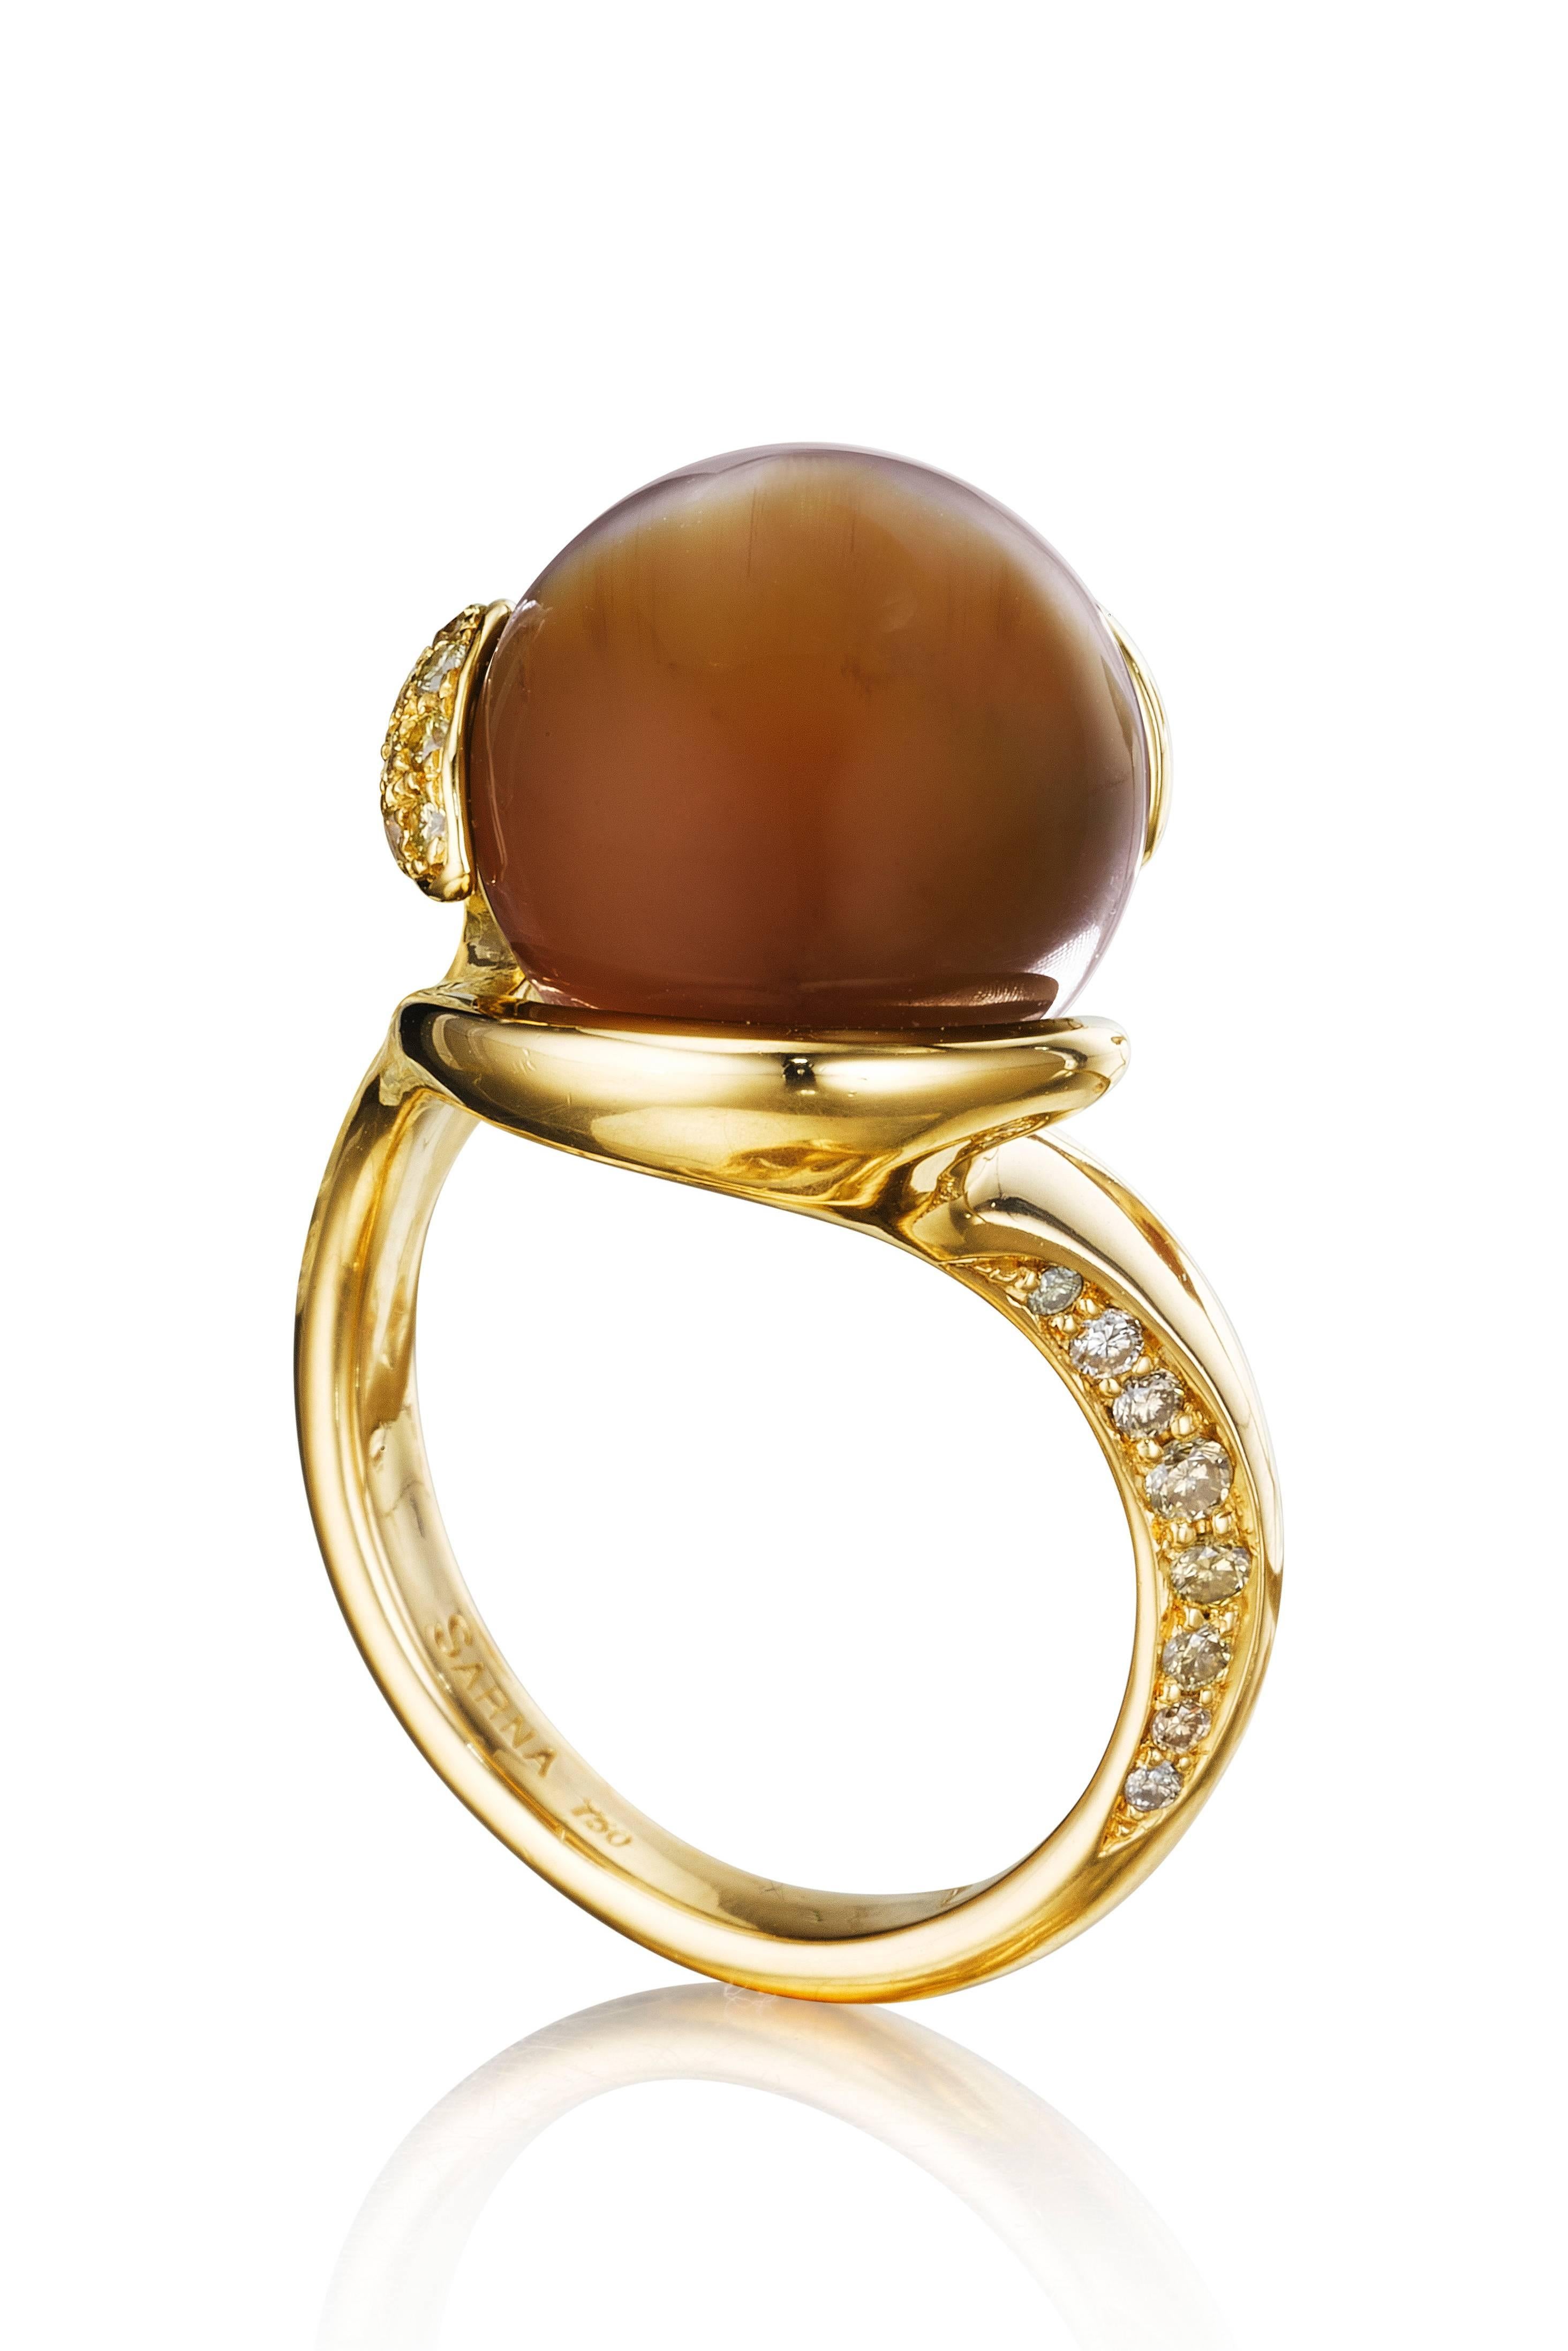 Naomi Sarna Brown Cat's Eye Opal Diamond Gold Ring In New Condition For Sale In New York, NY